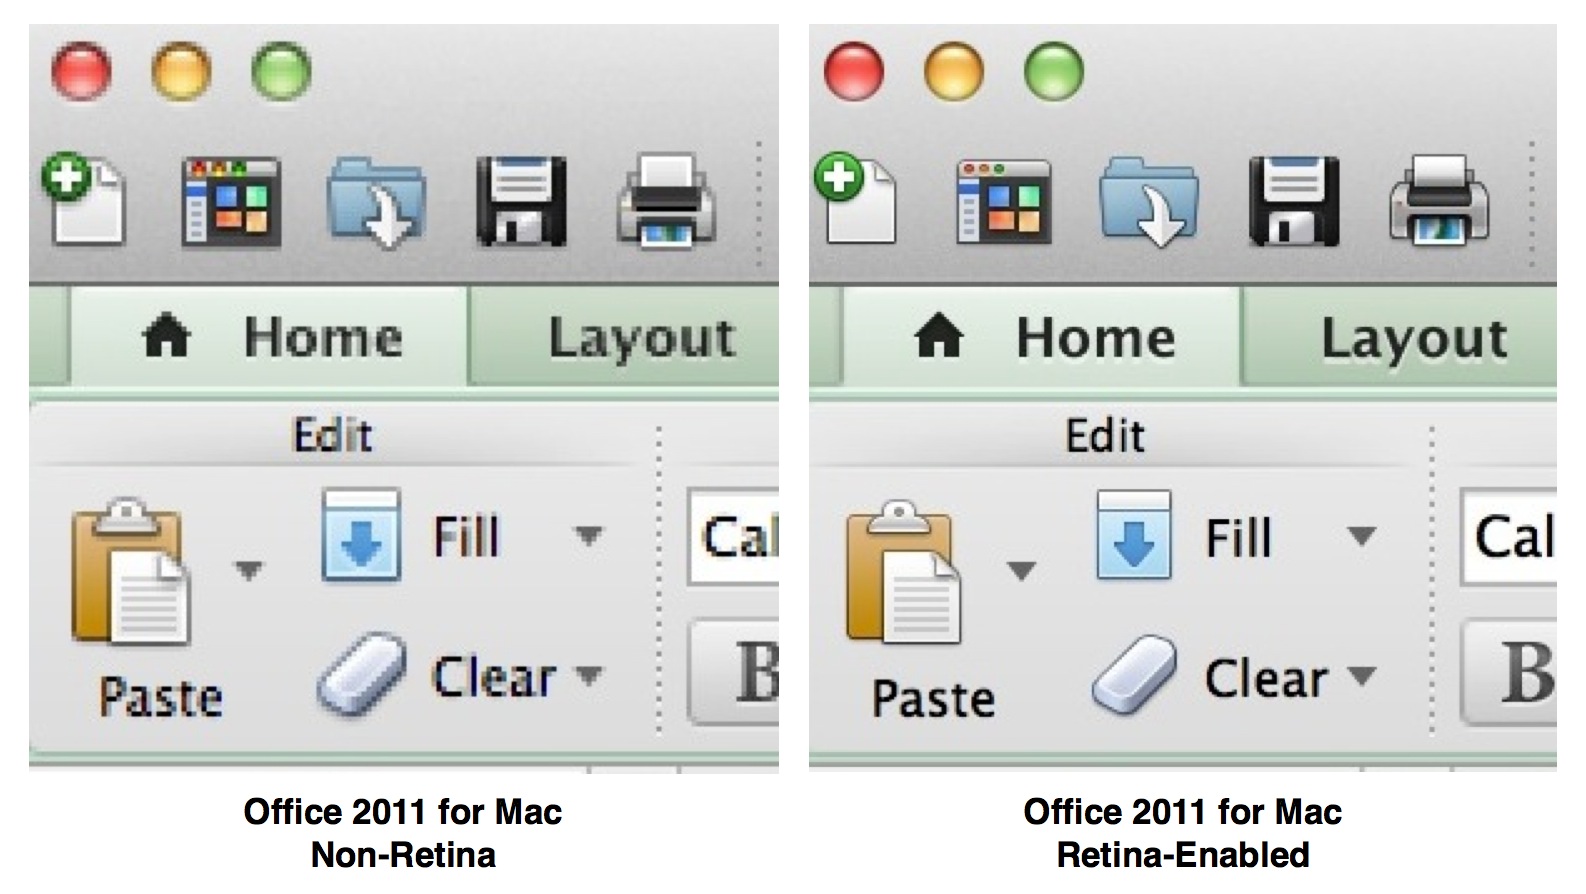 office 2011 for mac update 14.7.1